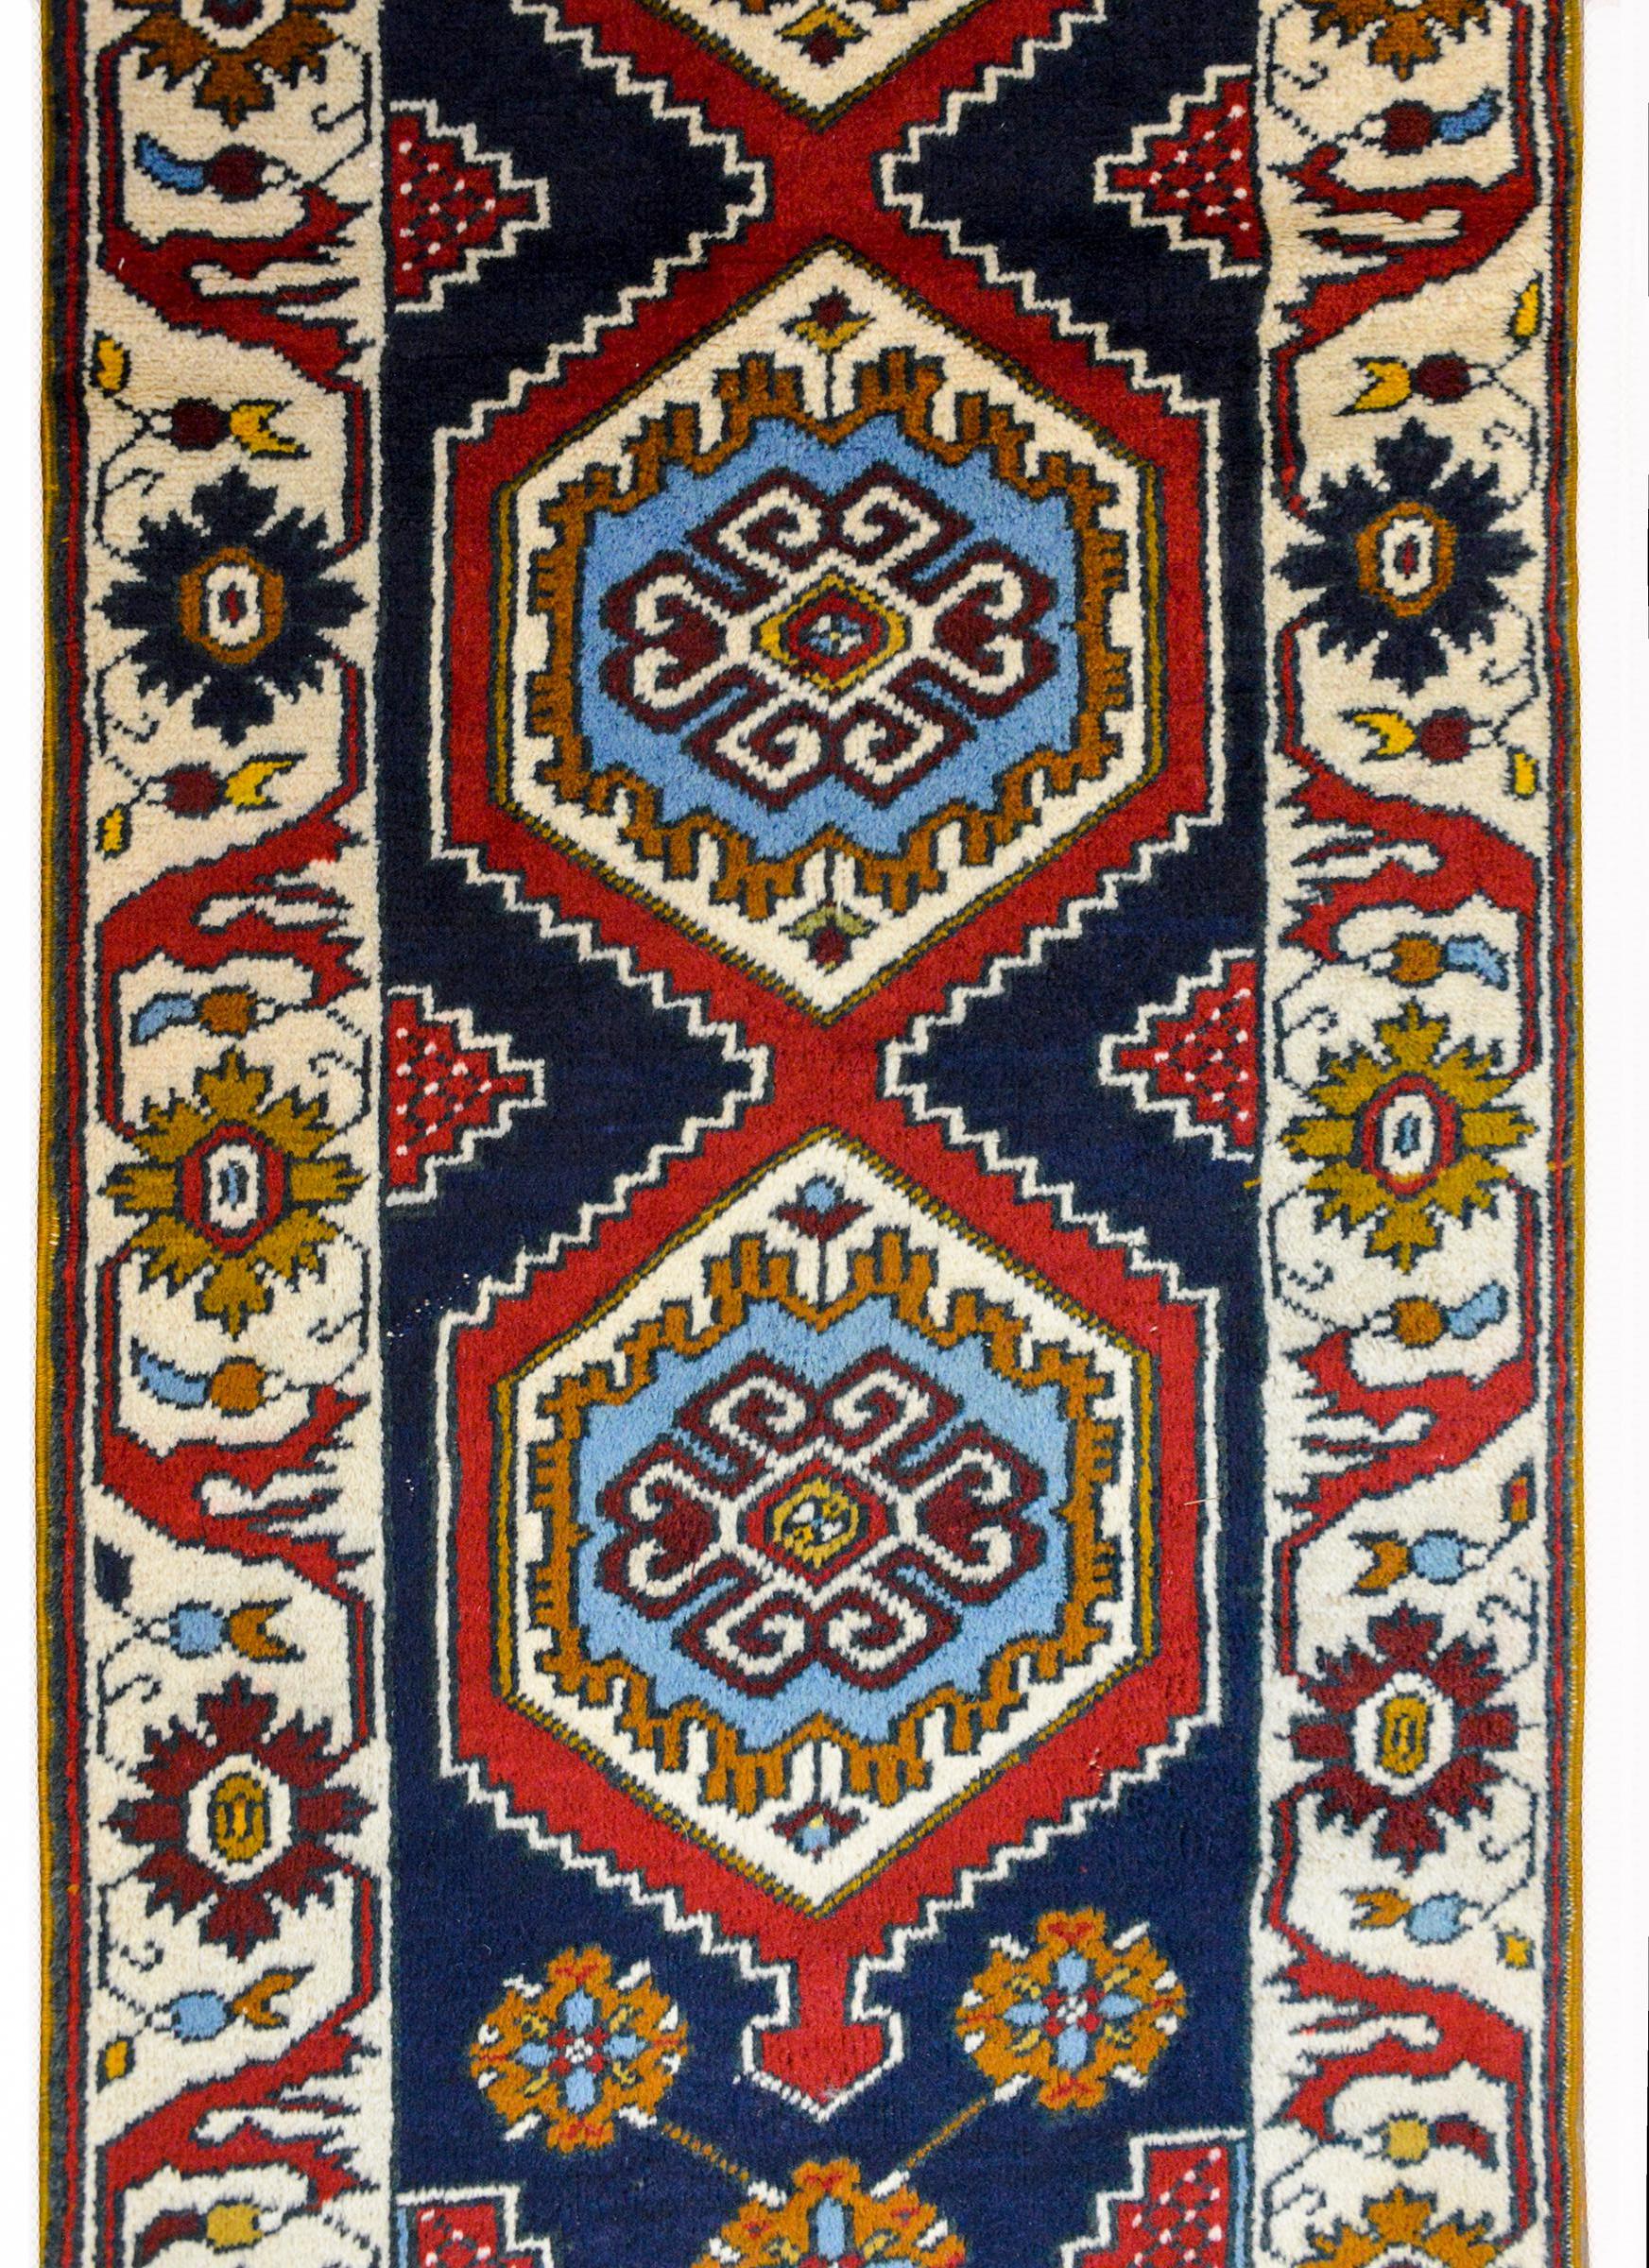 A wonderful 20th century Anatolian Turkish runner with four large boldly partnered medallions woven in brilliant indigo, gold, crimson, and white, set against a dark indigo background and amidst more stylized flowers. The border is bold, with a wide